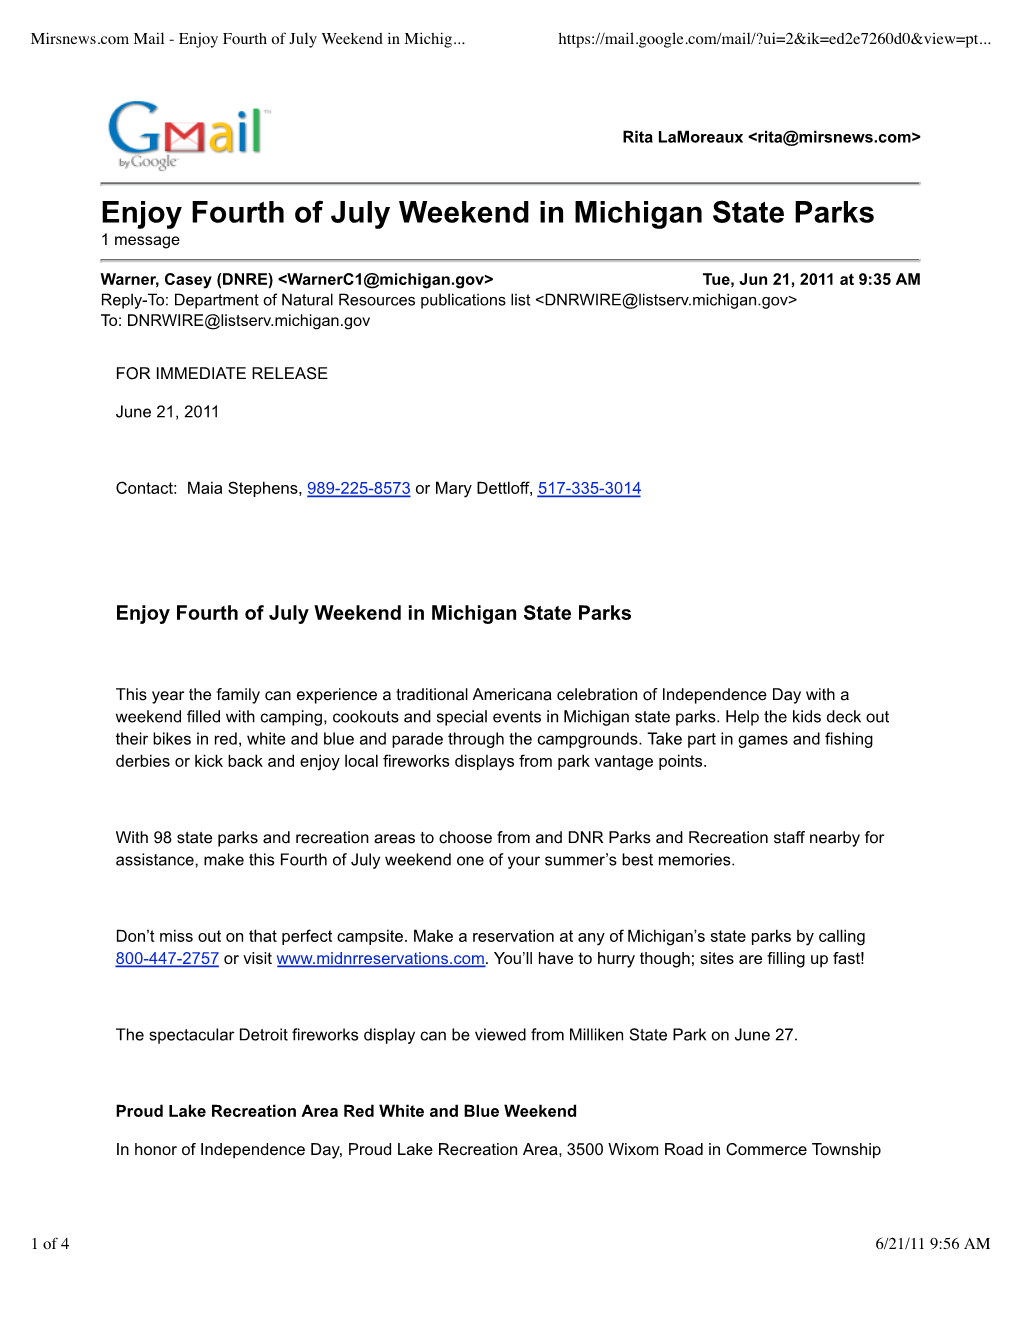 Enjoy Fourth of July Weekend in Michigan State Parks 1 Message